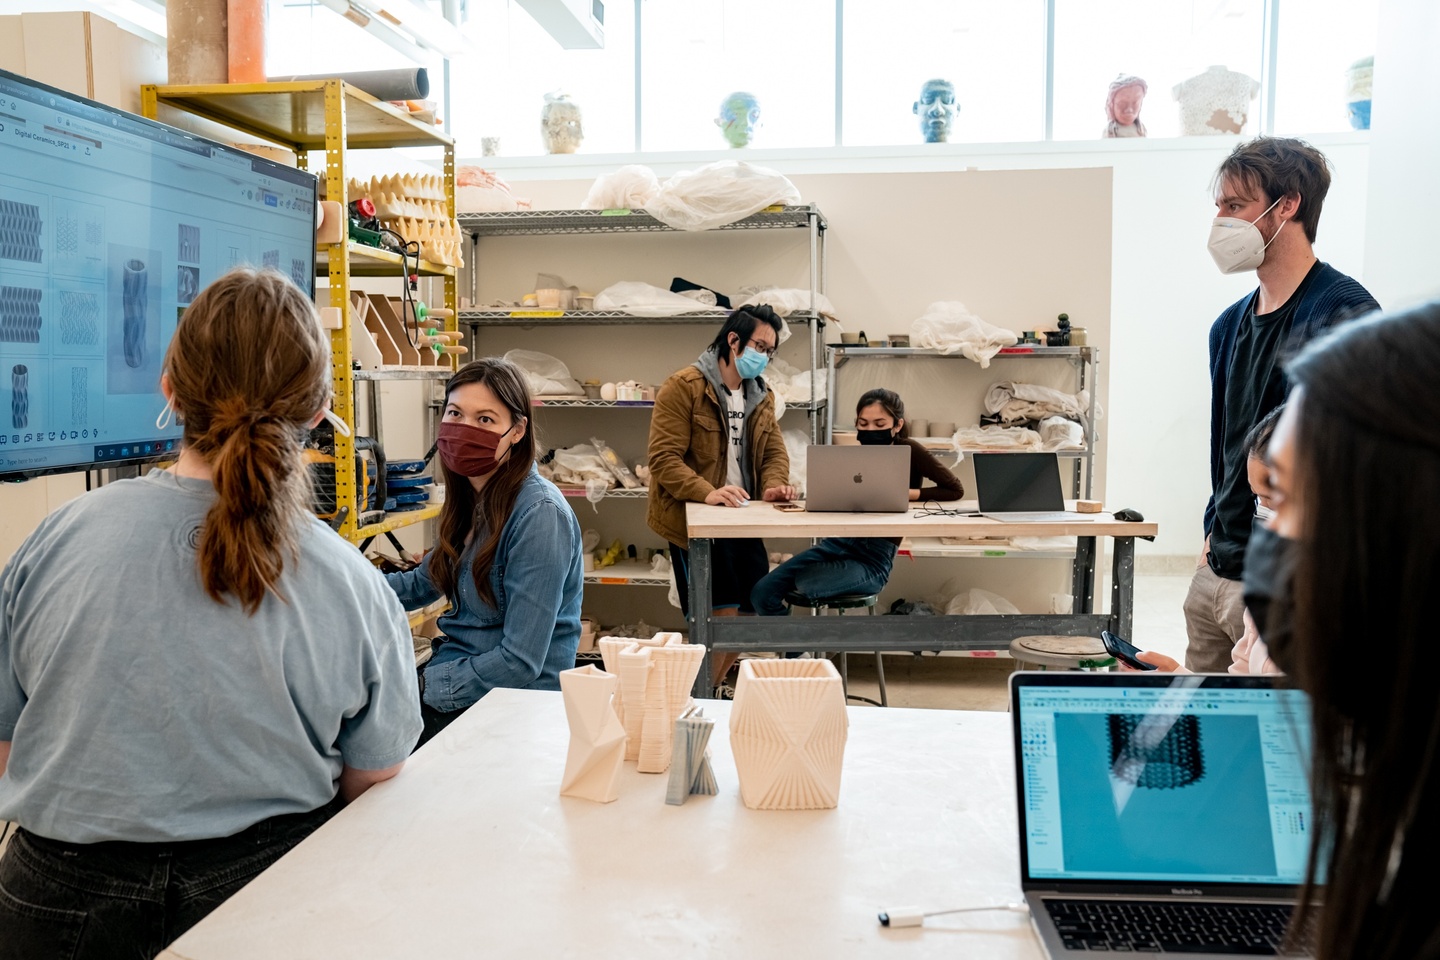 Person instructs several people on 3D printing using a large monitor. Three 3D-printed ceramic objects sit on the table next to them. The back wall has shelves lined with clay and other ceramics tools.